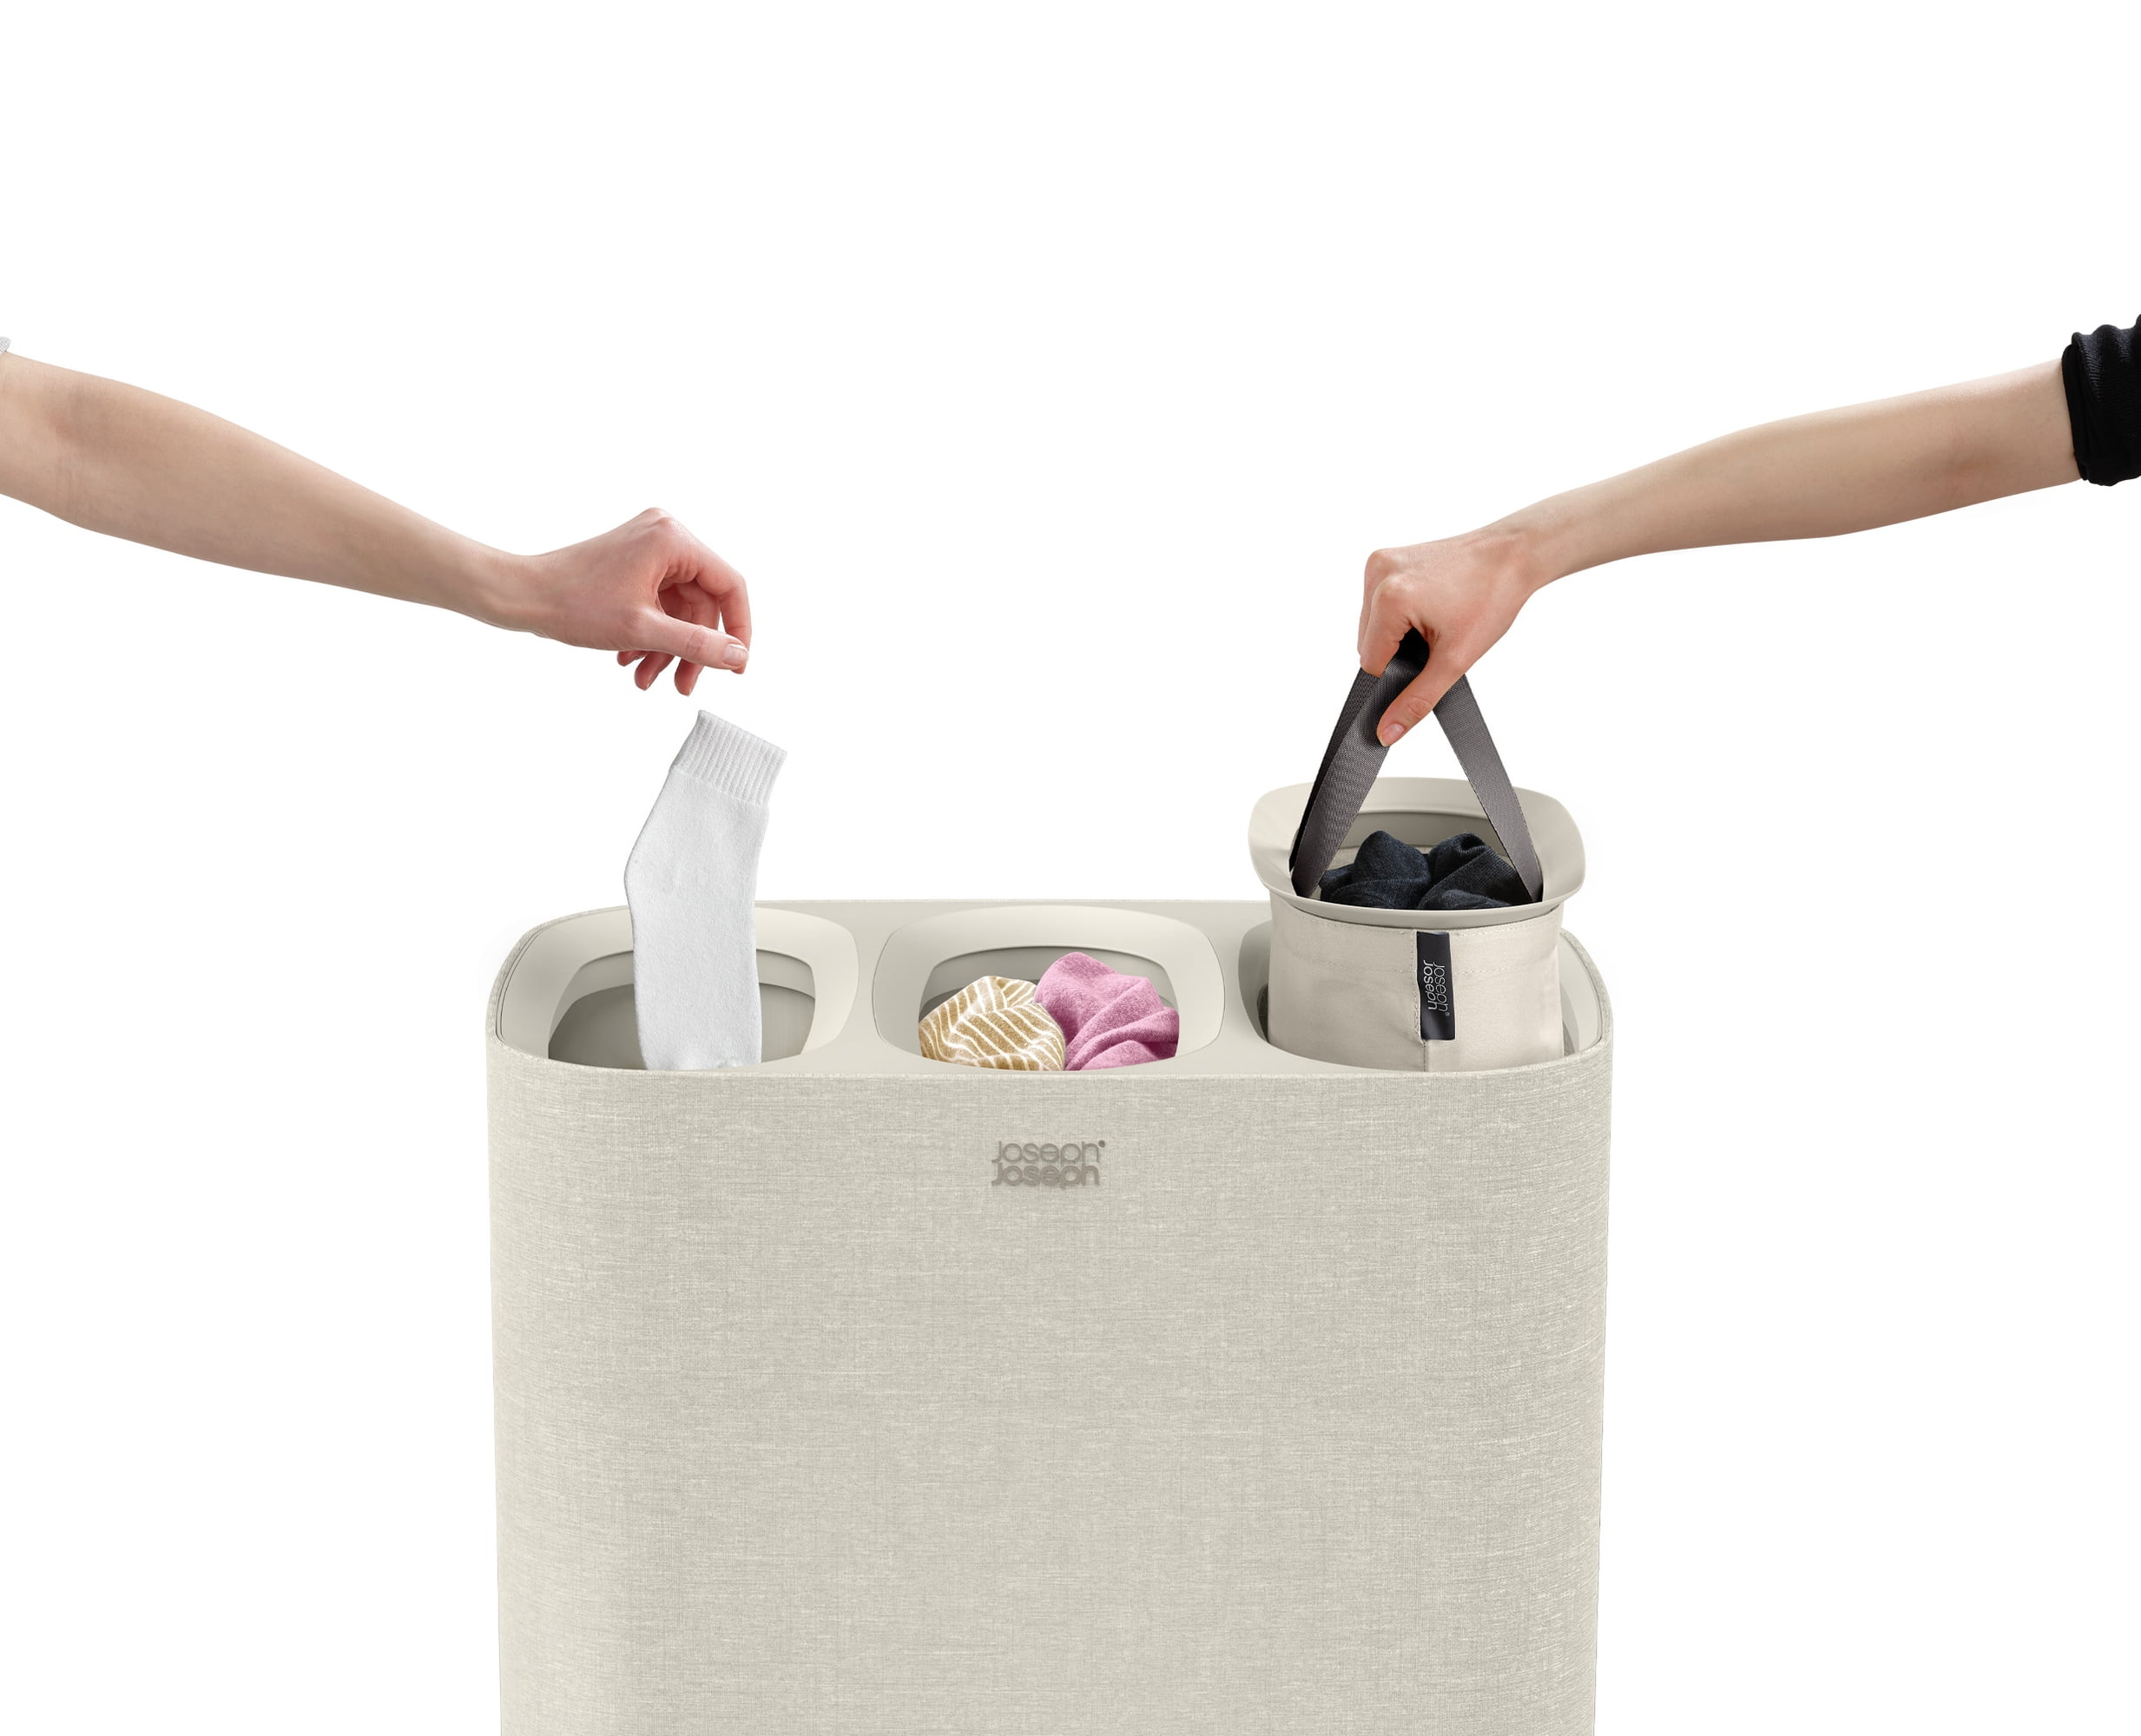 Joseph Joseph Hold-All™ Collapsible Laundry Basket & Reviews